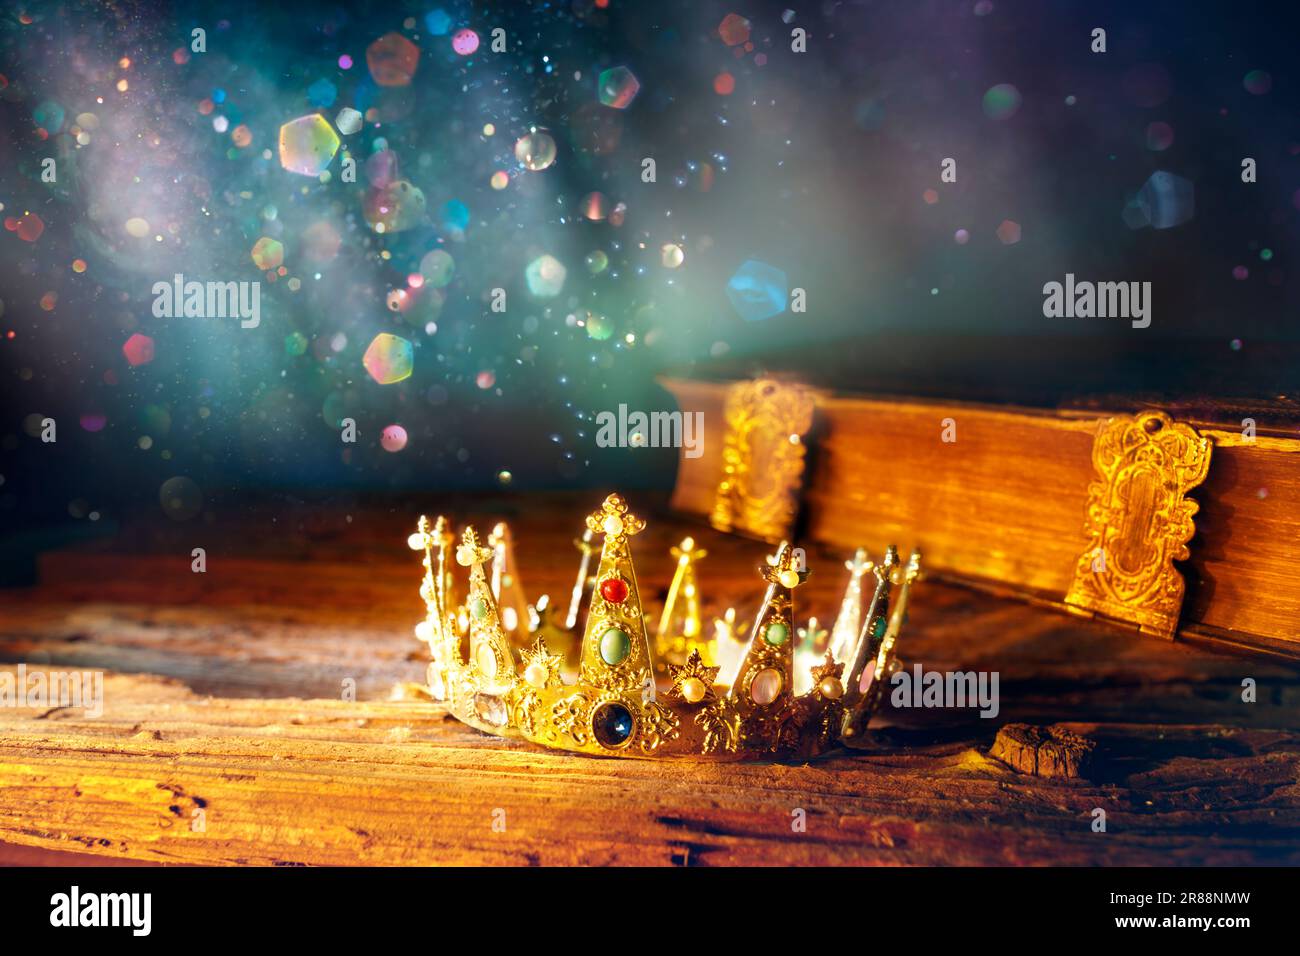 Medieval King Crown And Old Book - Story Of Fantasy kingdom With Magic Glittering And Abstract Defocused Lights Stock Photo